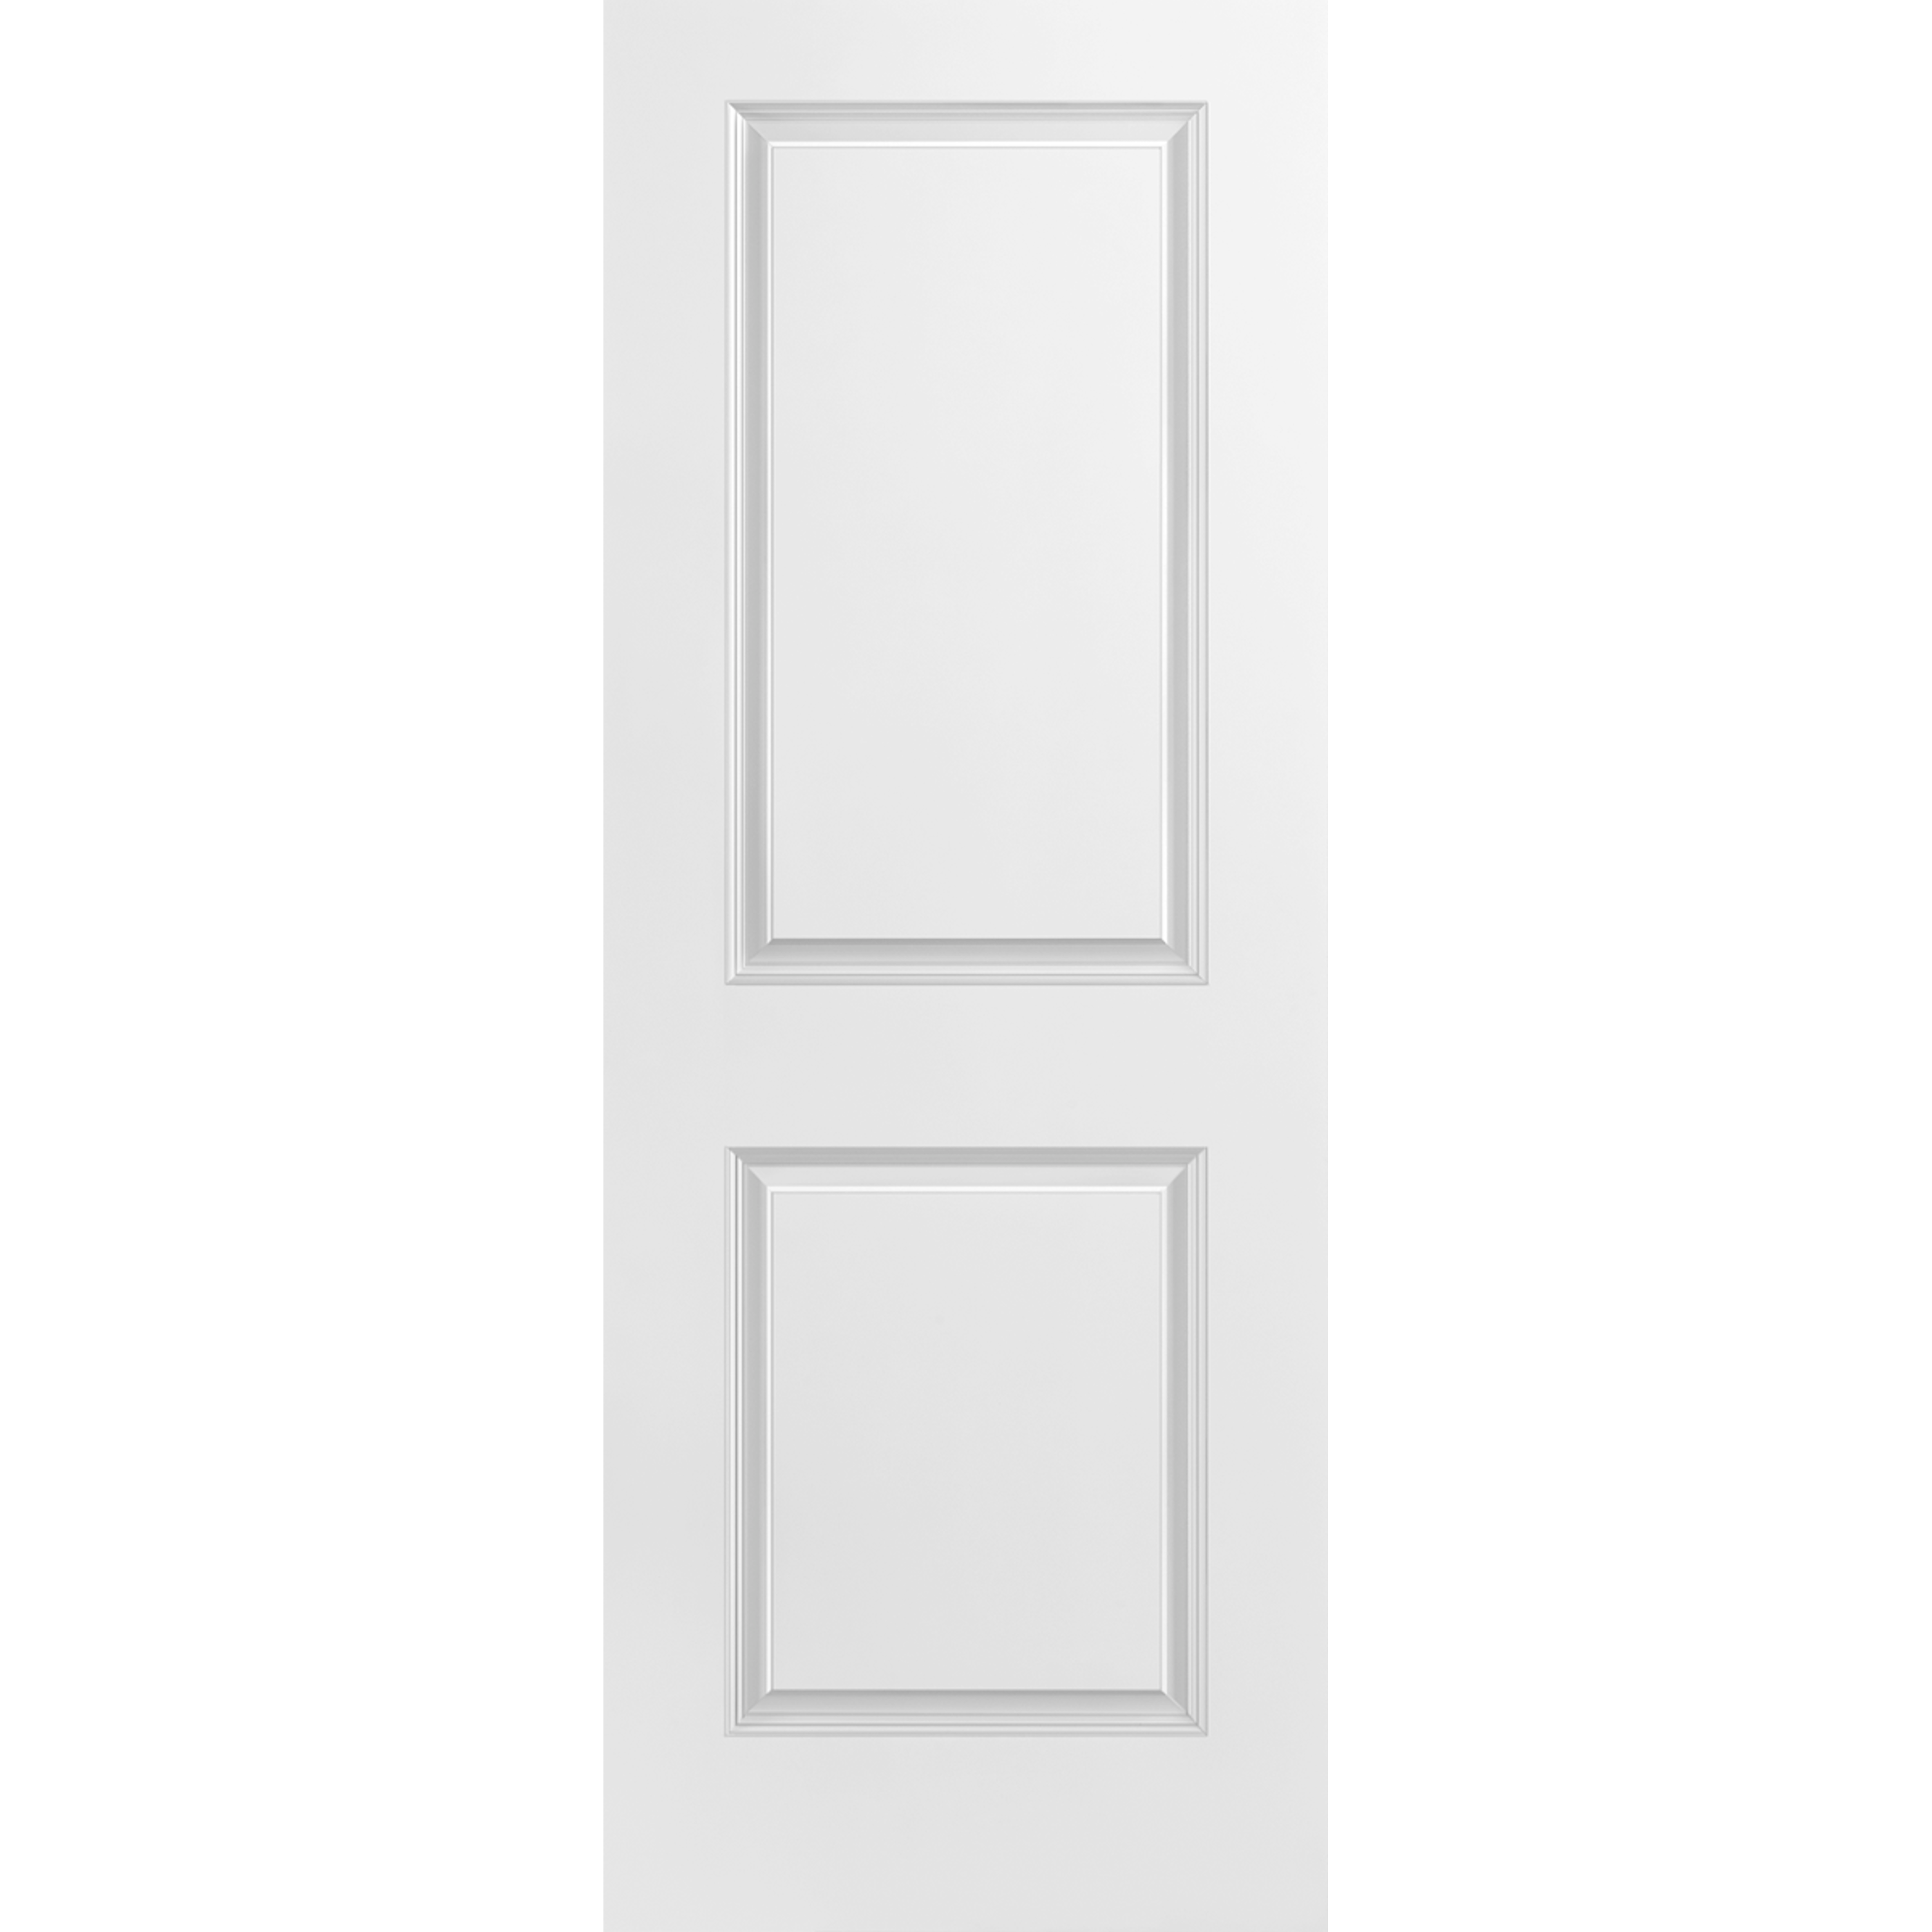 30x80 2 Panel Square Smooth Moulded Fast Fit Door with 4-5/8" PFJ Jamb